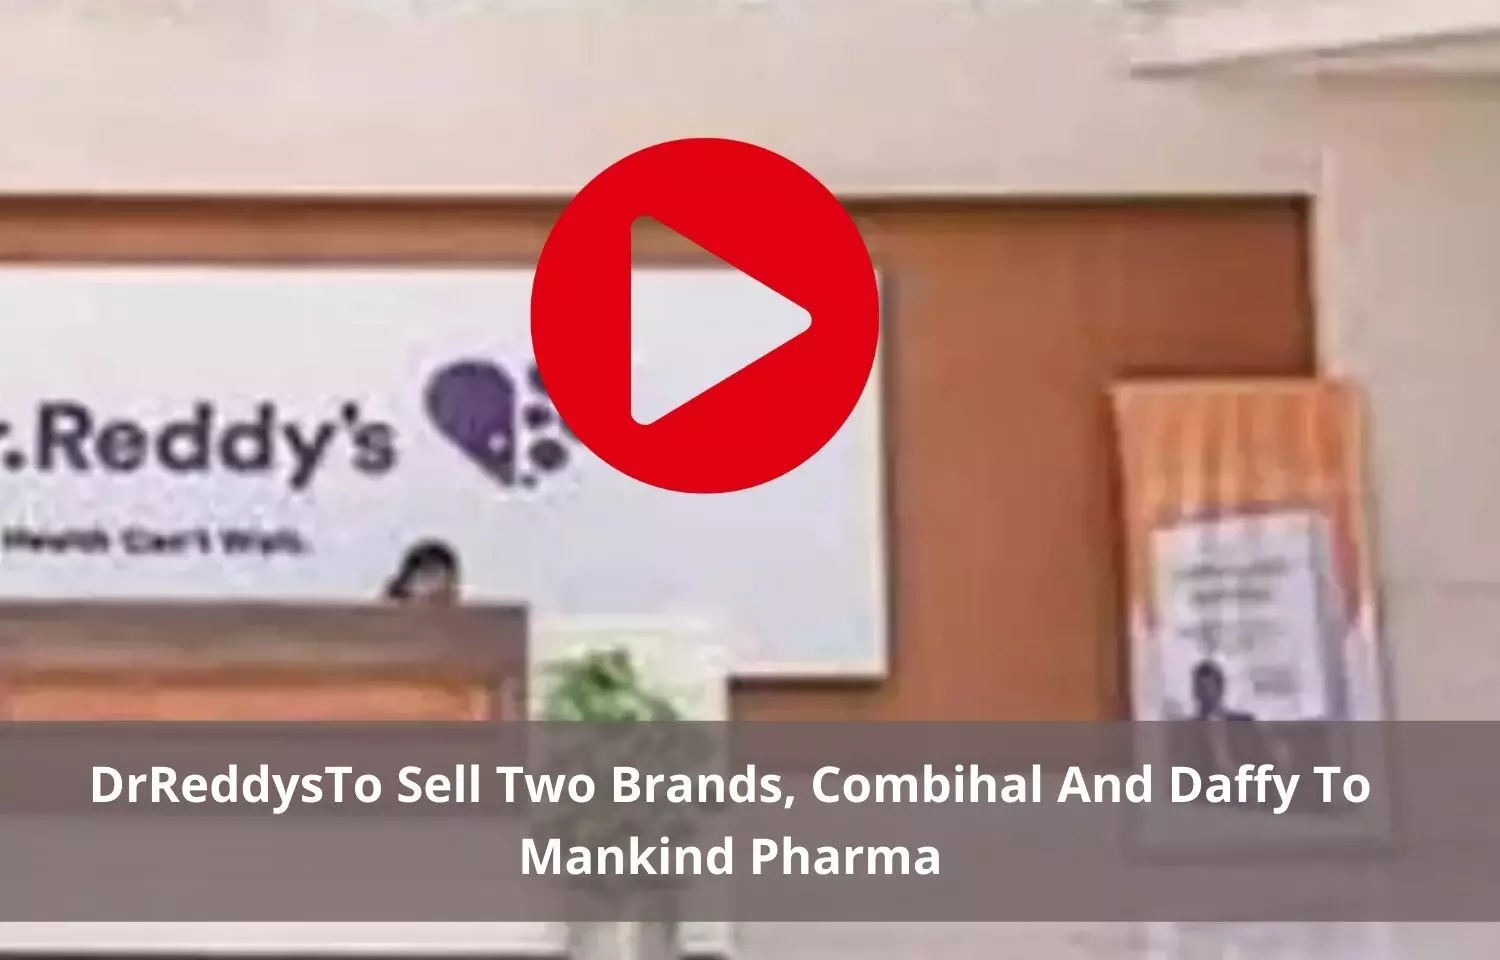 Mankind Pharma to buy Combihale, Daffy brands from Dr Reddys